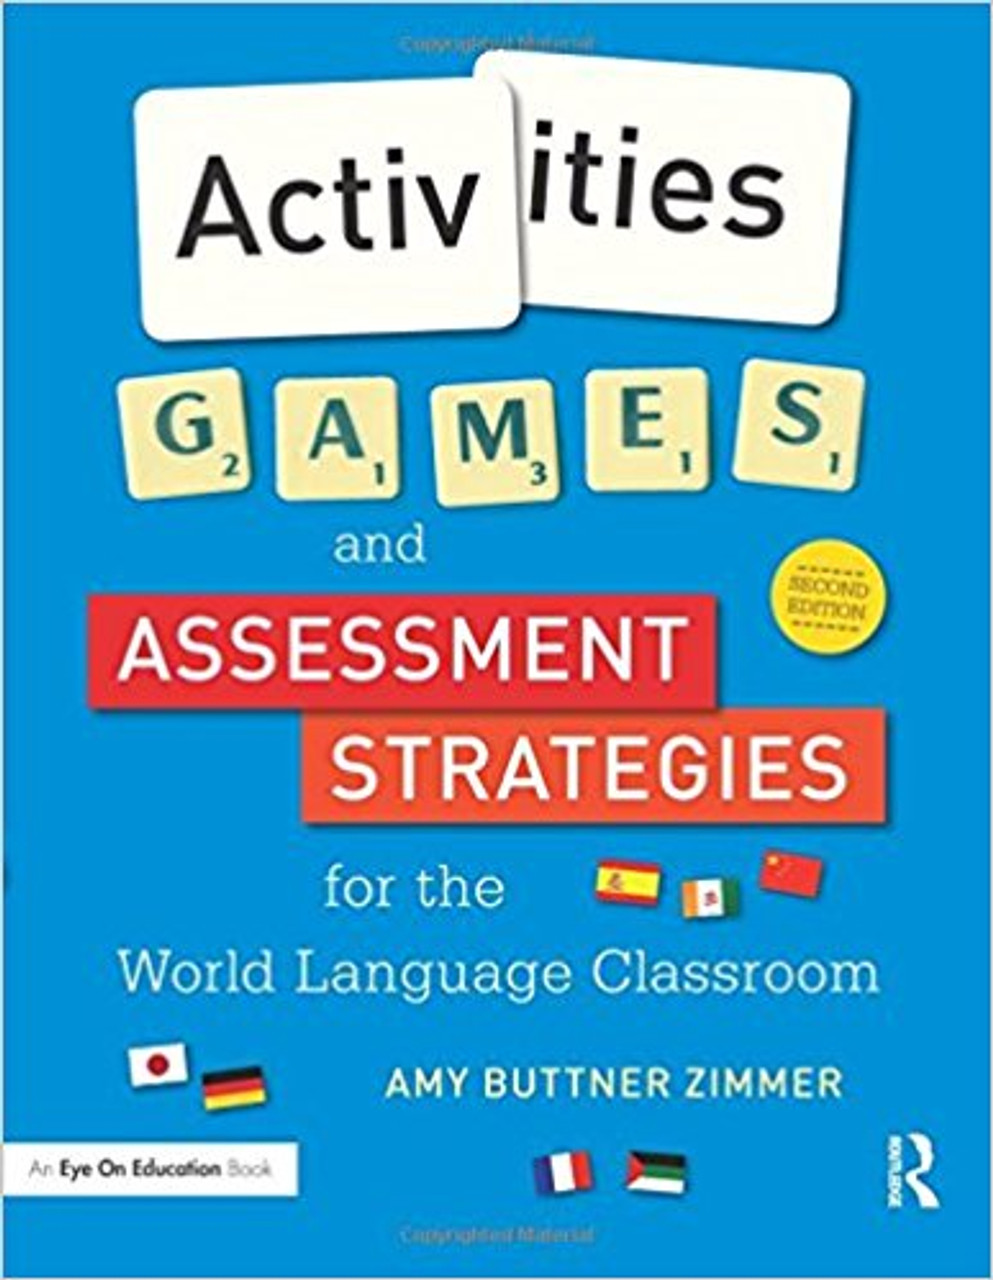 Activities, Games, and Assessment Strategies for the World Language Classroom by Amy Buttner Zimmer